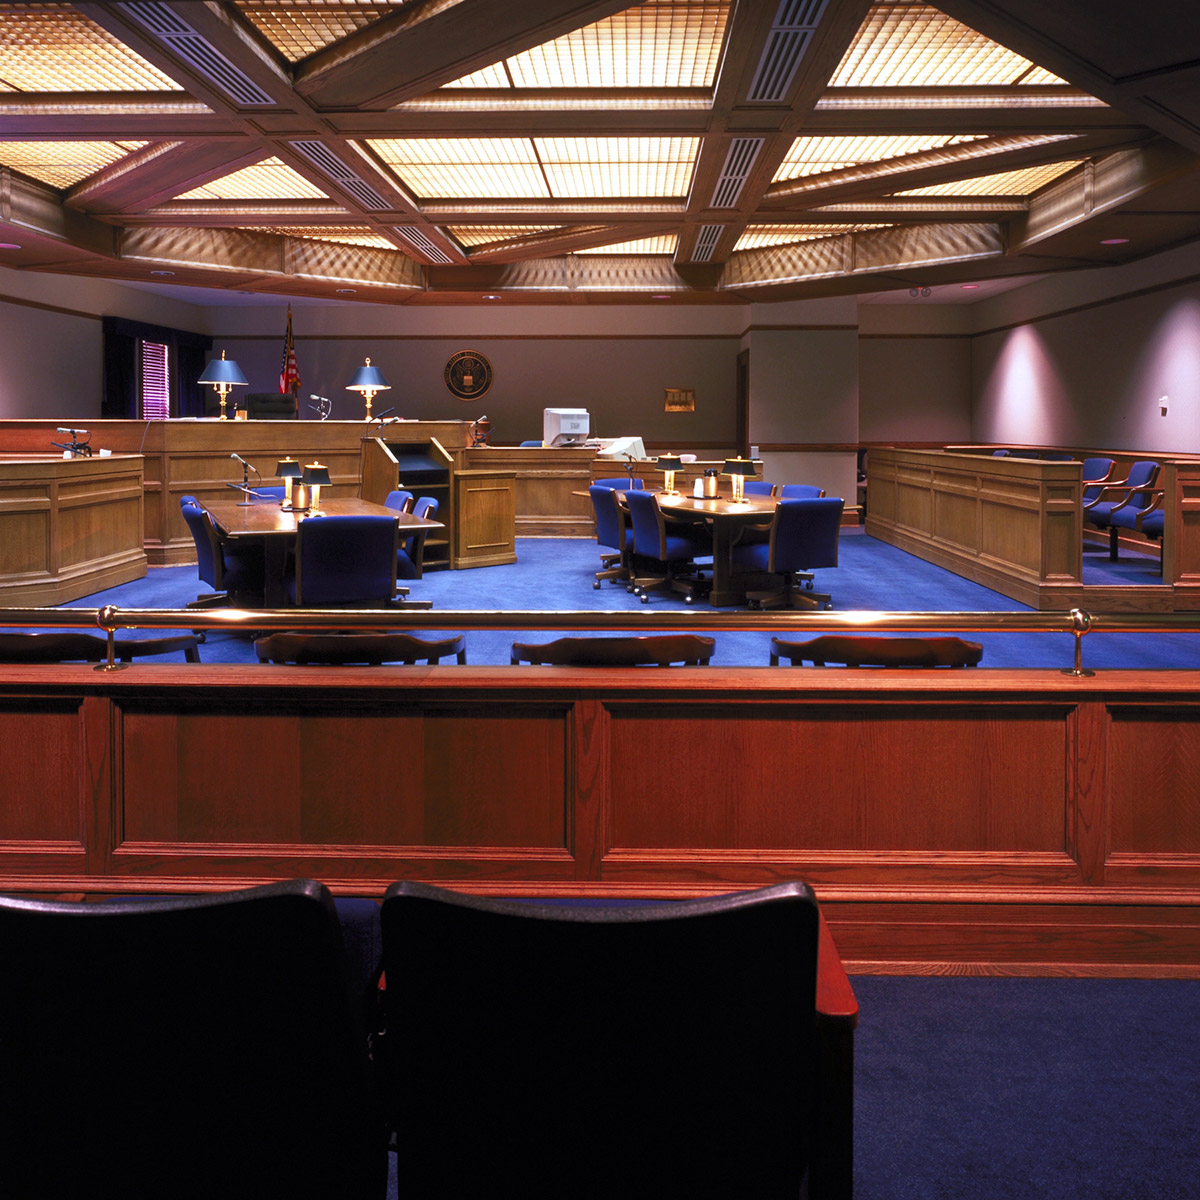 Court room interior with gridded ceiling lighting